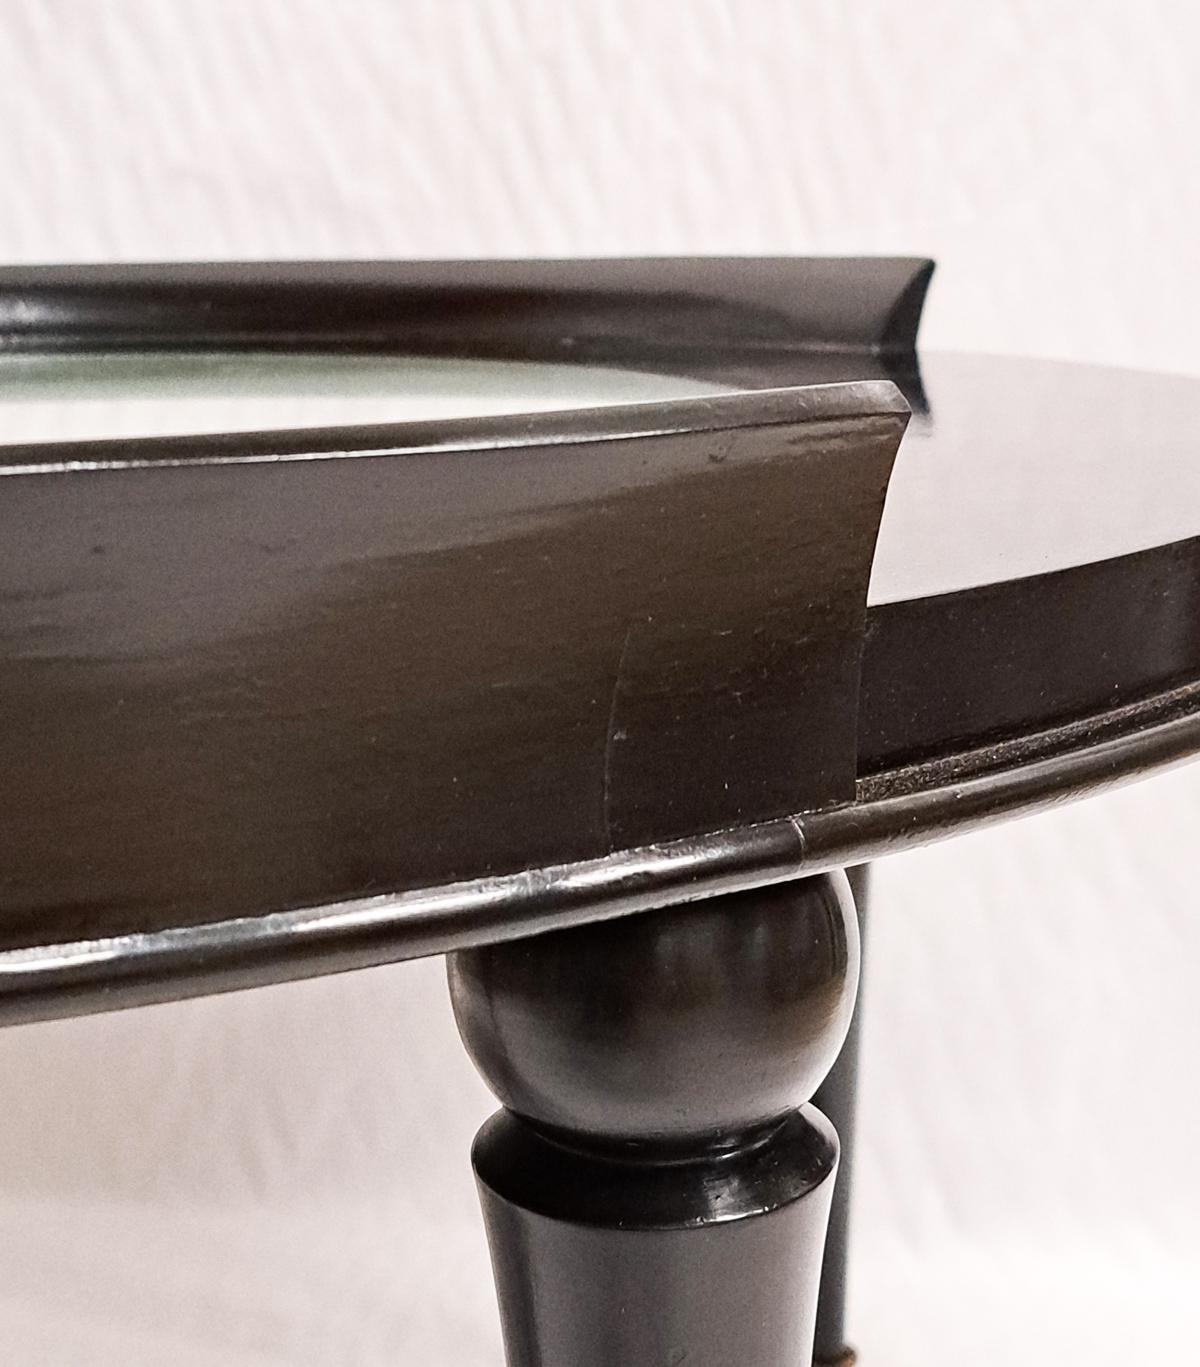 Italian Ebonized Round Coffee Table with a Mirrored Top, 1950s For Sale